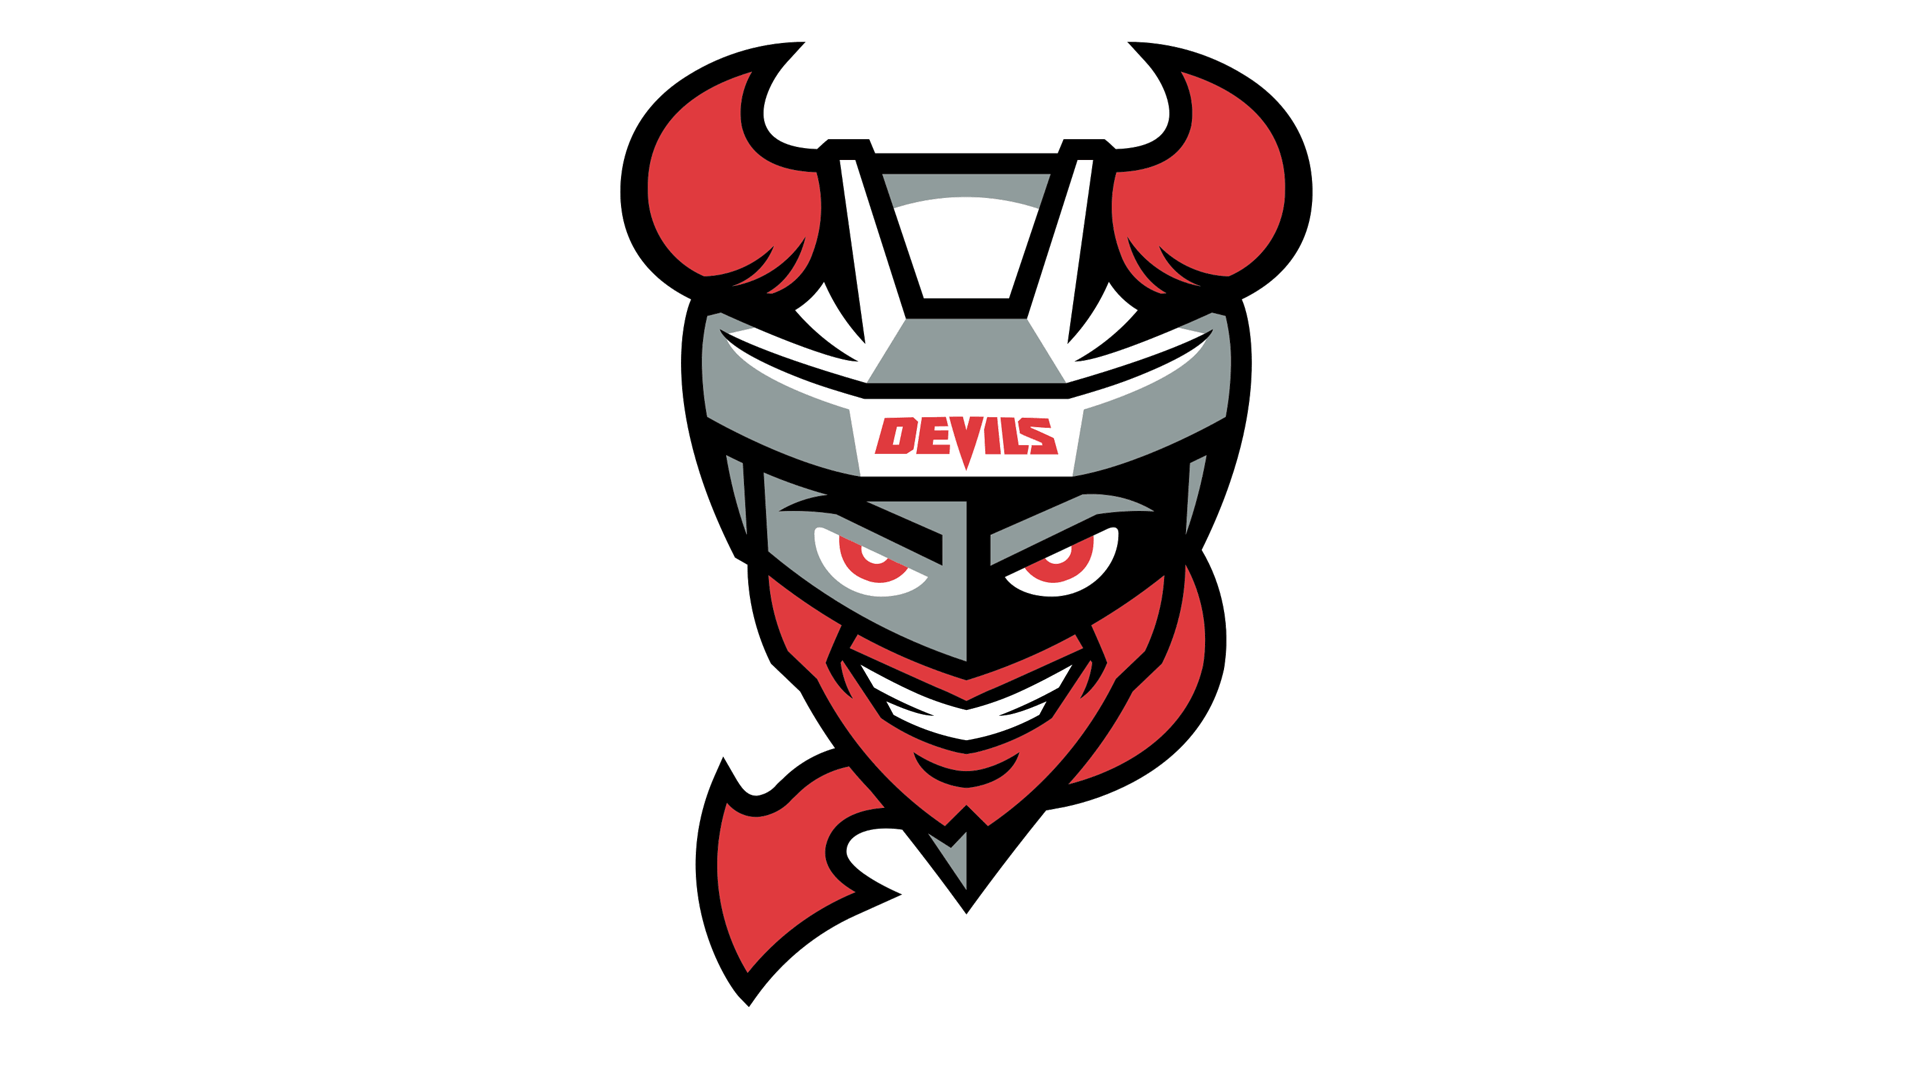 Devils Logo - Binghamton Devils Logo, Binghamton Devils Symbol, Meaning, History ...